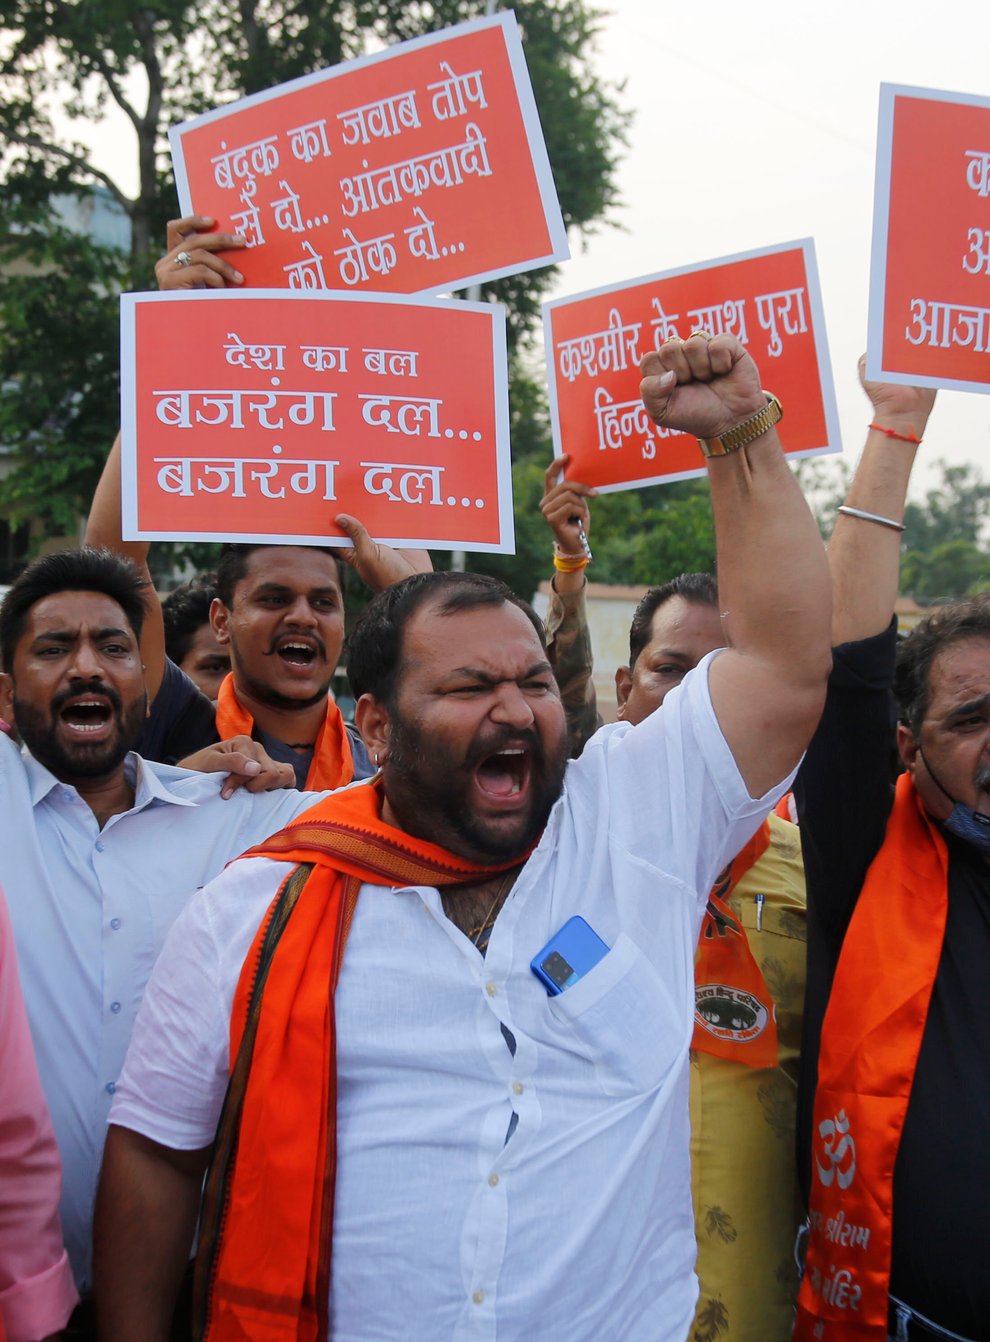 Supporters of Hindu right-wing Vishwa Hindu Parishad (VHP) or World Hindu Council and Bajrang Dal hold placards as they shout slogans during a protest in Ahmedabad against the recent targeted killings of civilians in Indian-controlled Kashmir (Ajit Solanki/AP)